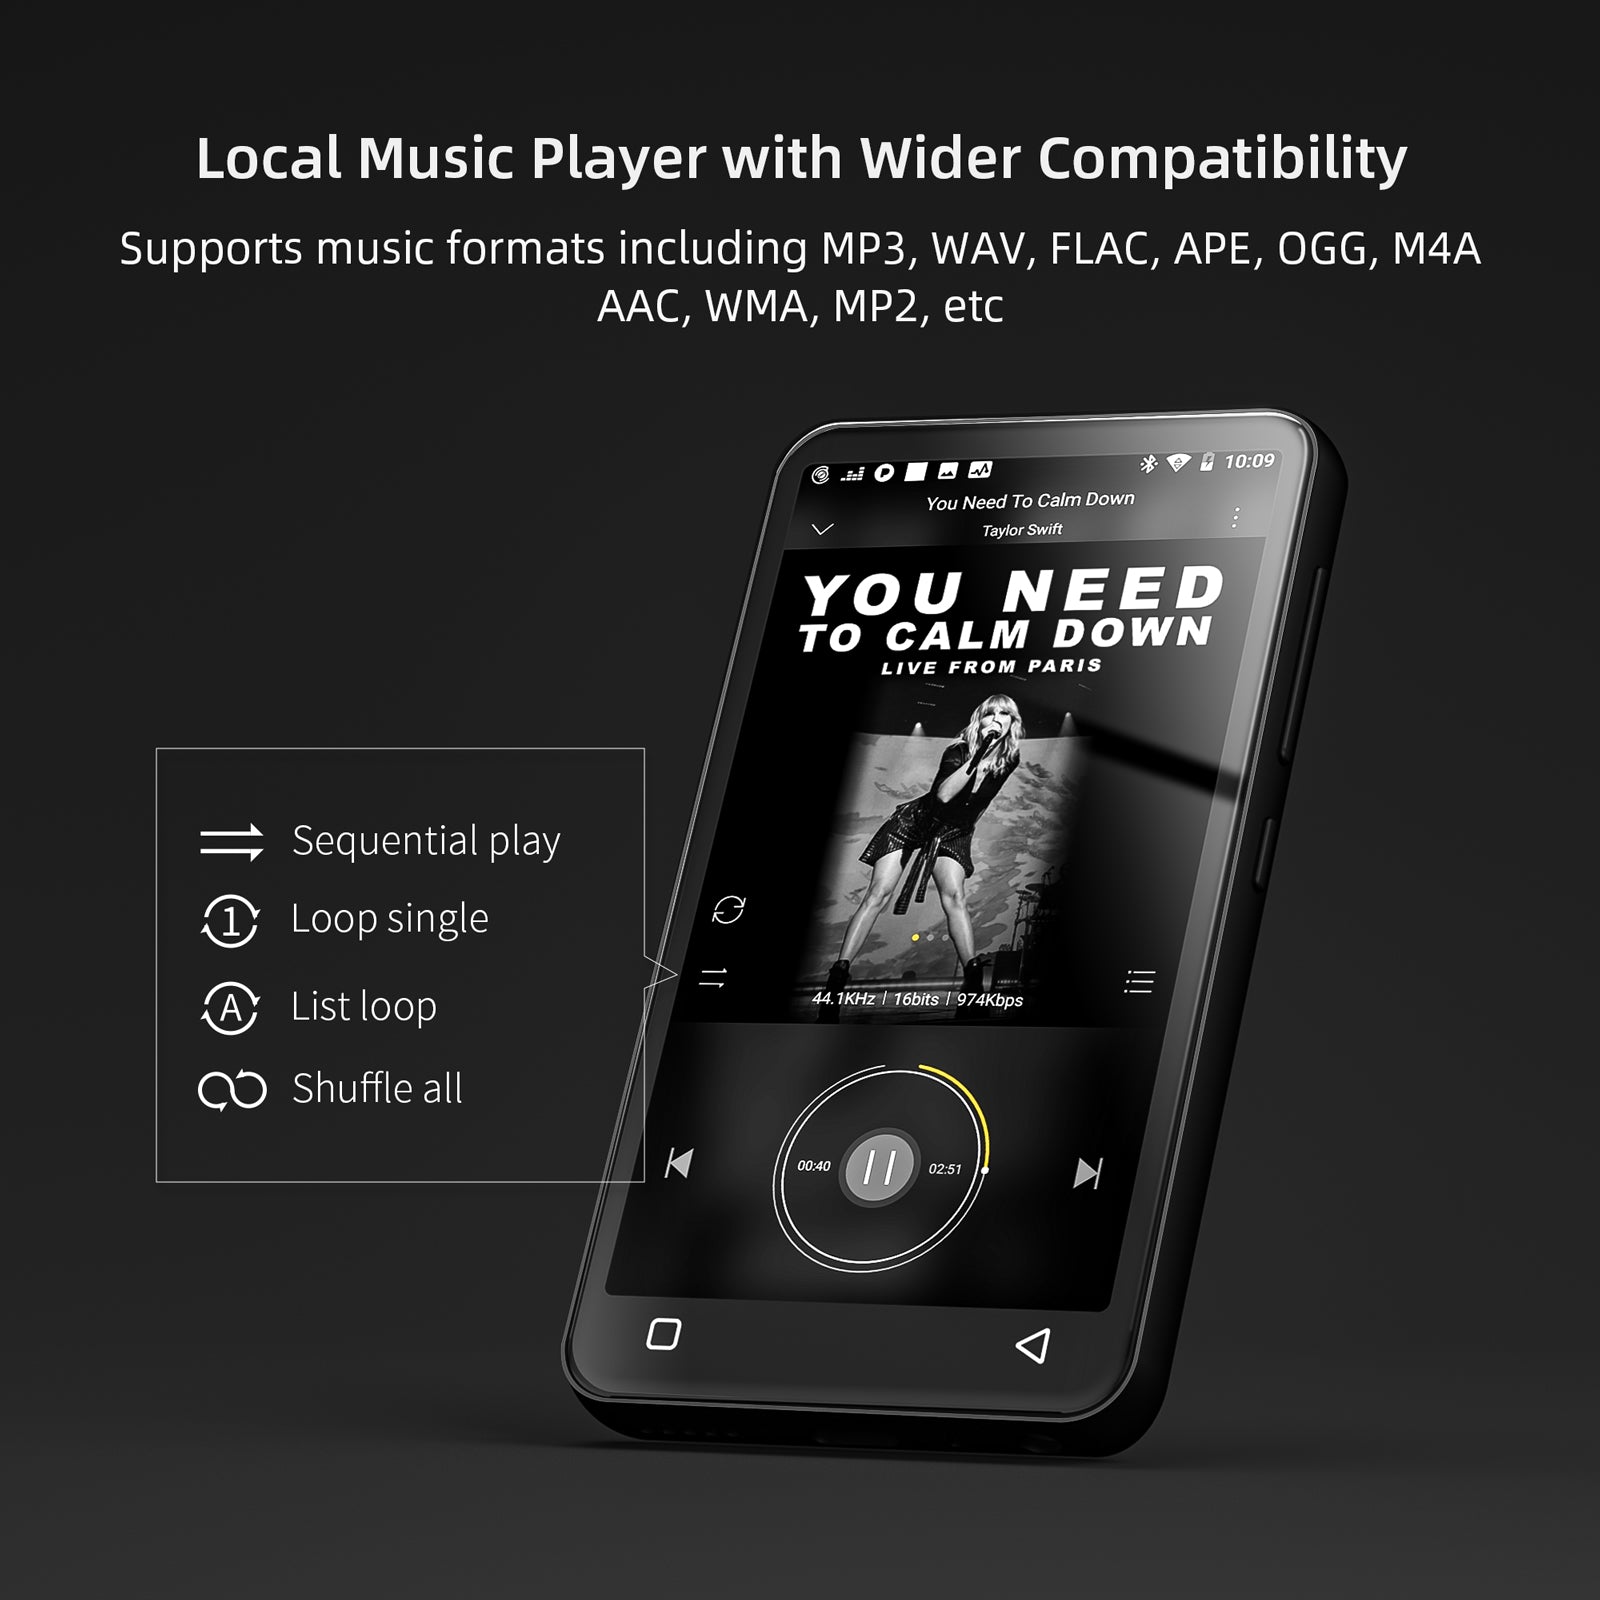 MP3 Player with Bluetooth and WiFi, 4" Full Touch Screen MP4 MP3 Player with Spotify, Android Streaming Music Player with Pandora, Portable HiFi Sound Walkman Digital Audio Player with Speaker